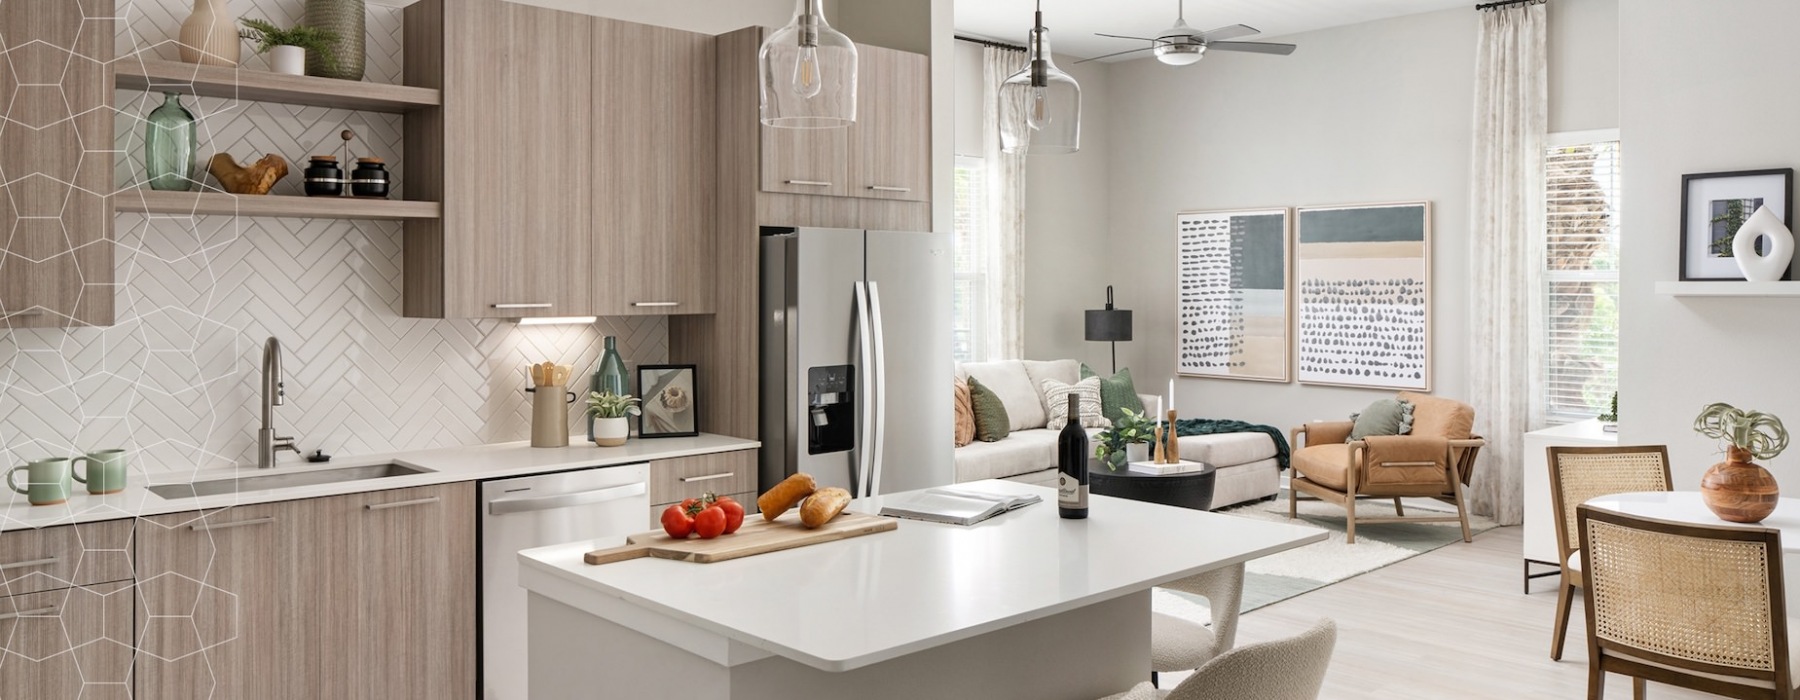 Apartment kitchen with modern finishes at Aventon Lana